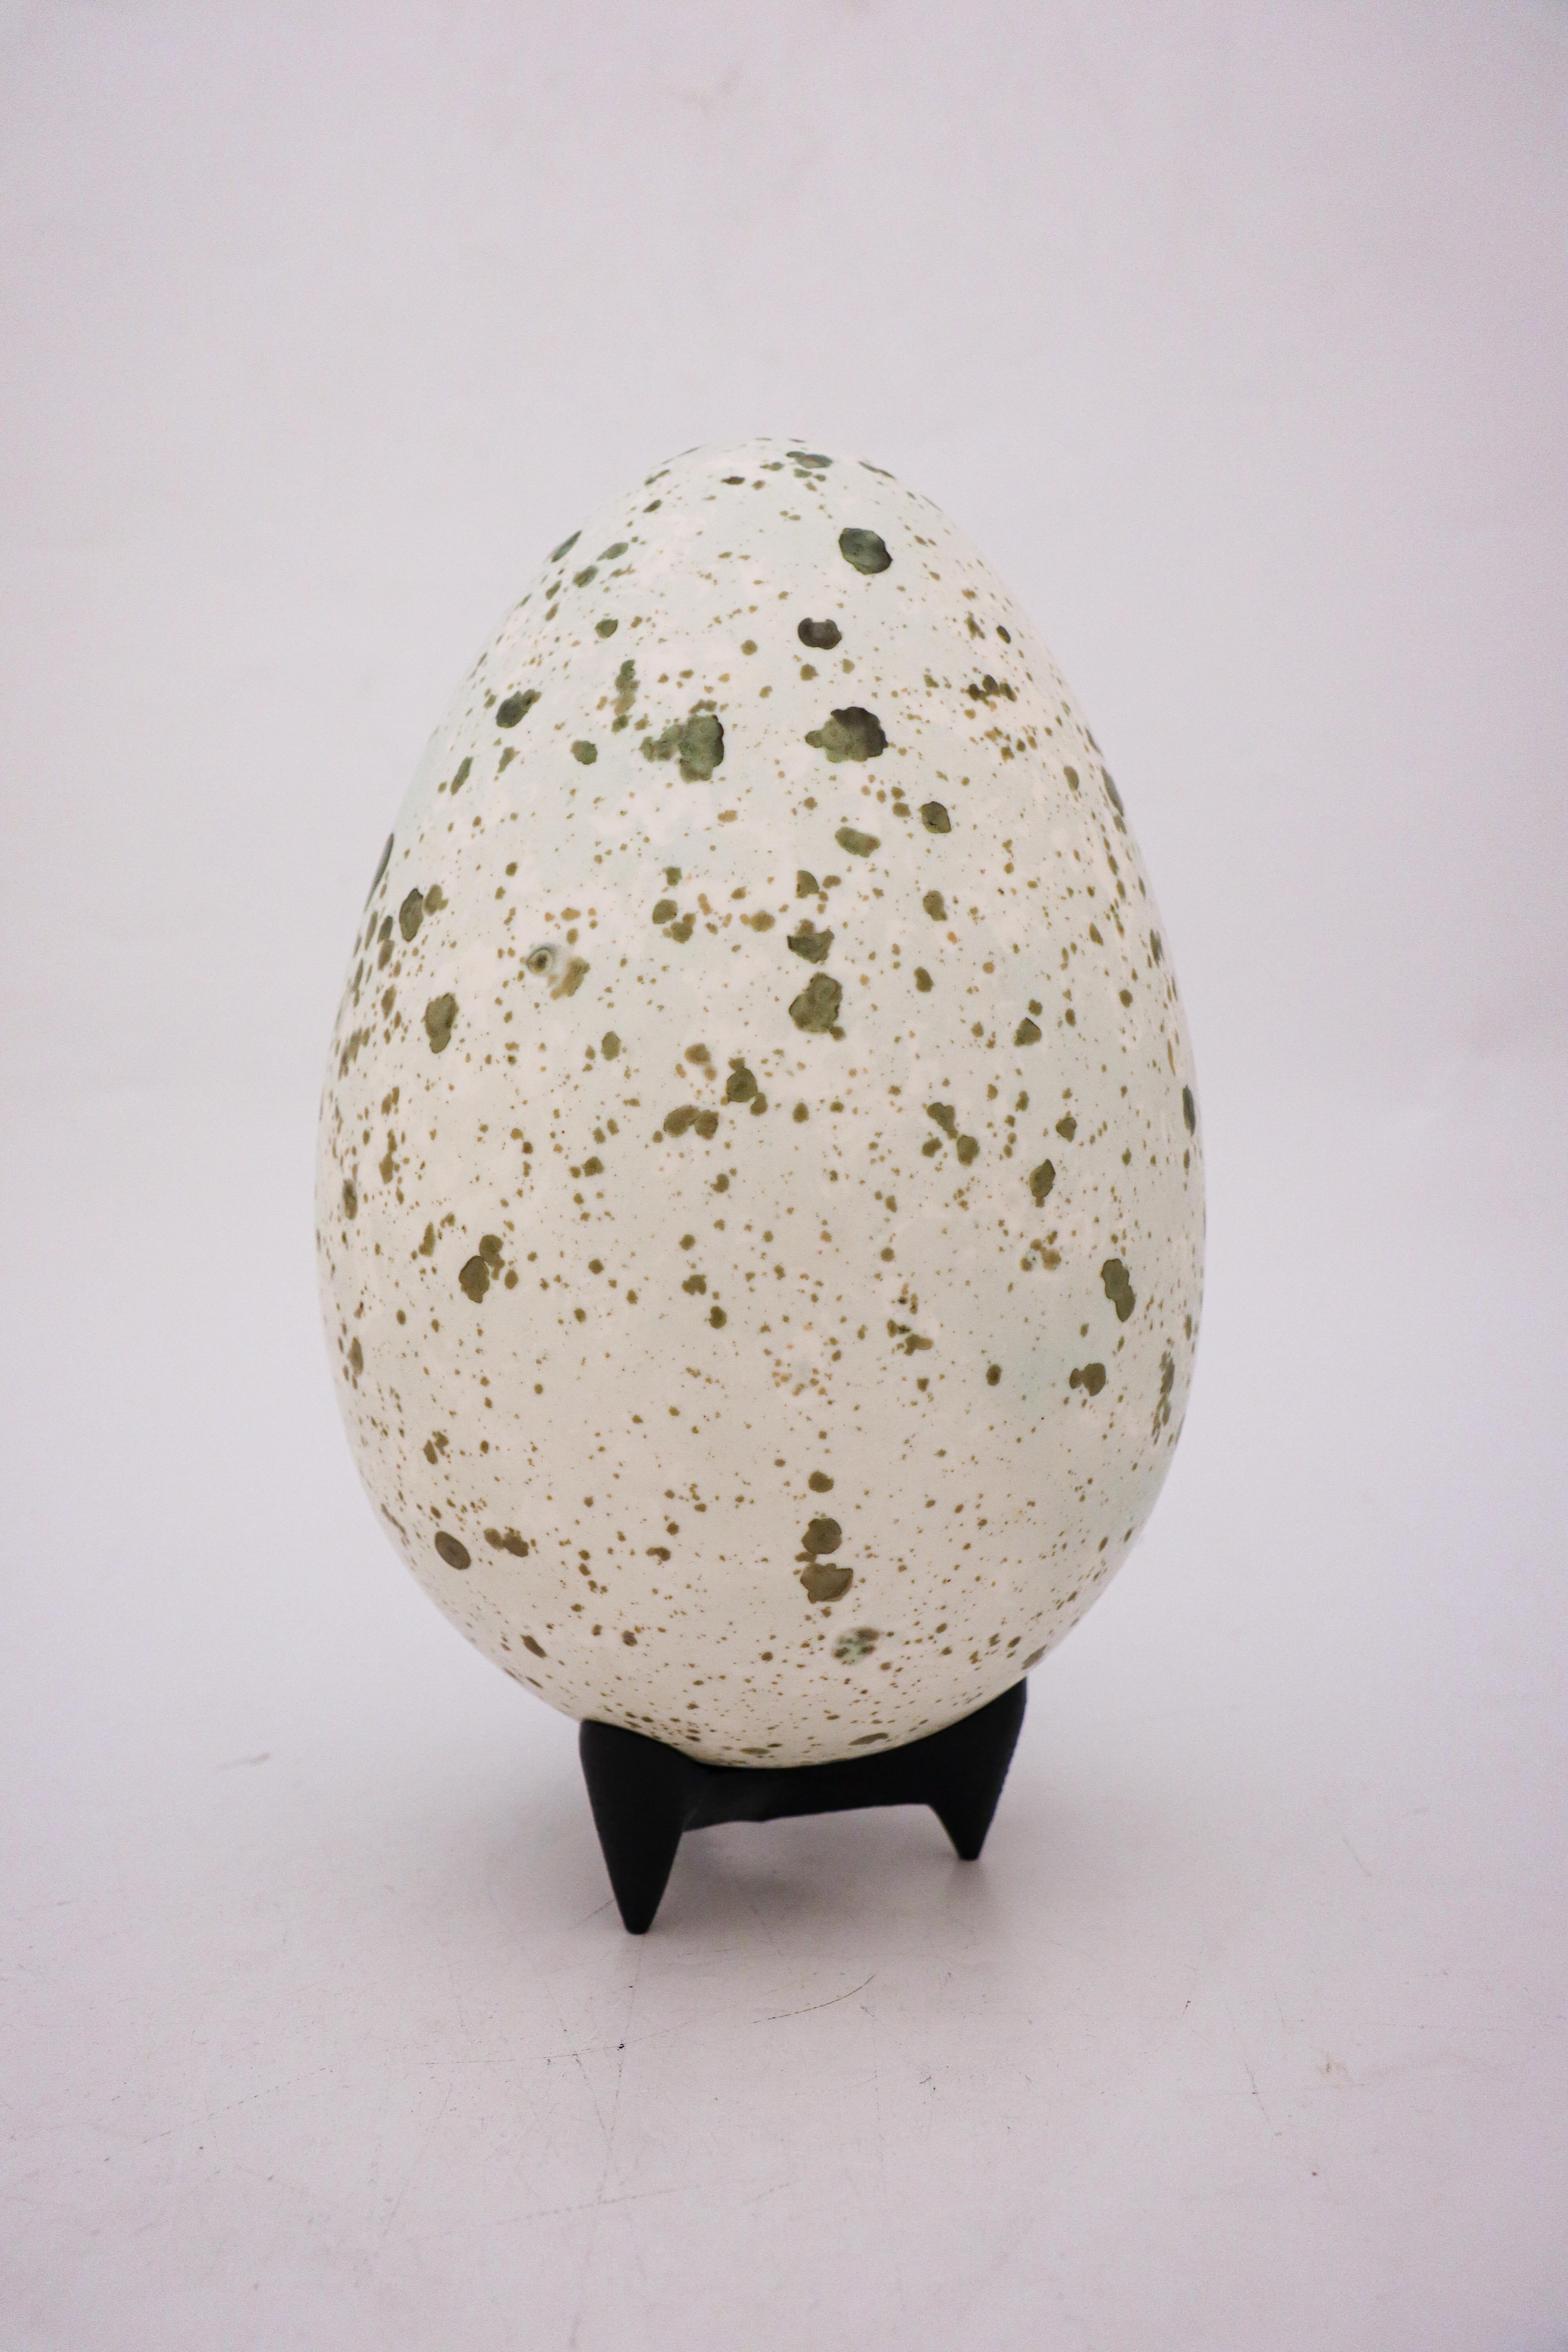 An egg designed by the Swedish ceramicist Hans Hedberg, who lived and worked in Biot, France. This egg is 30 cm (12